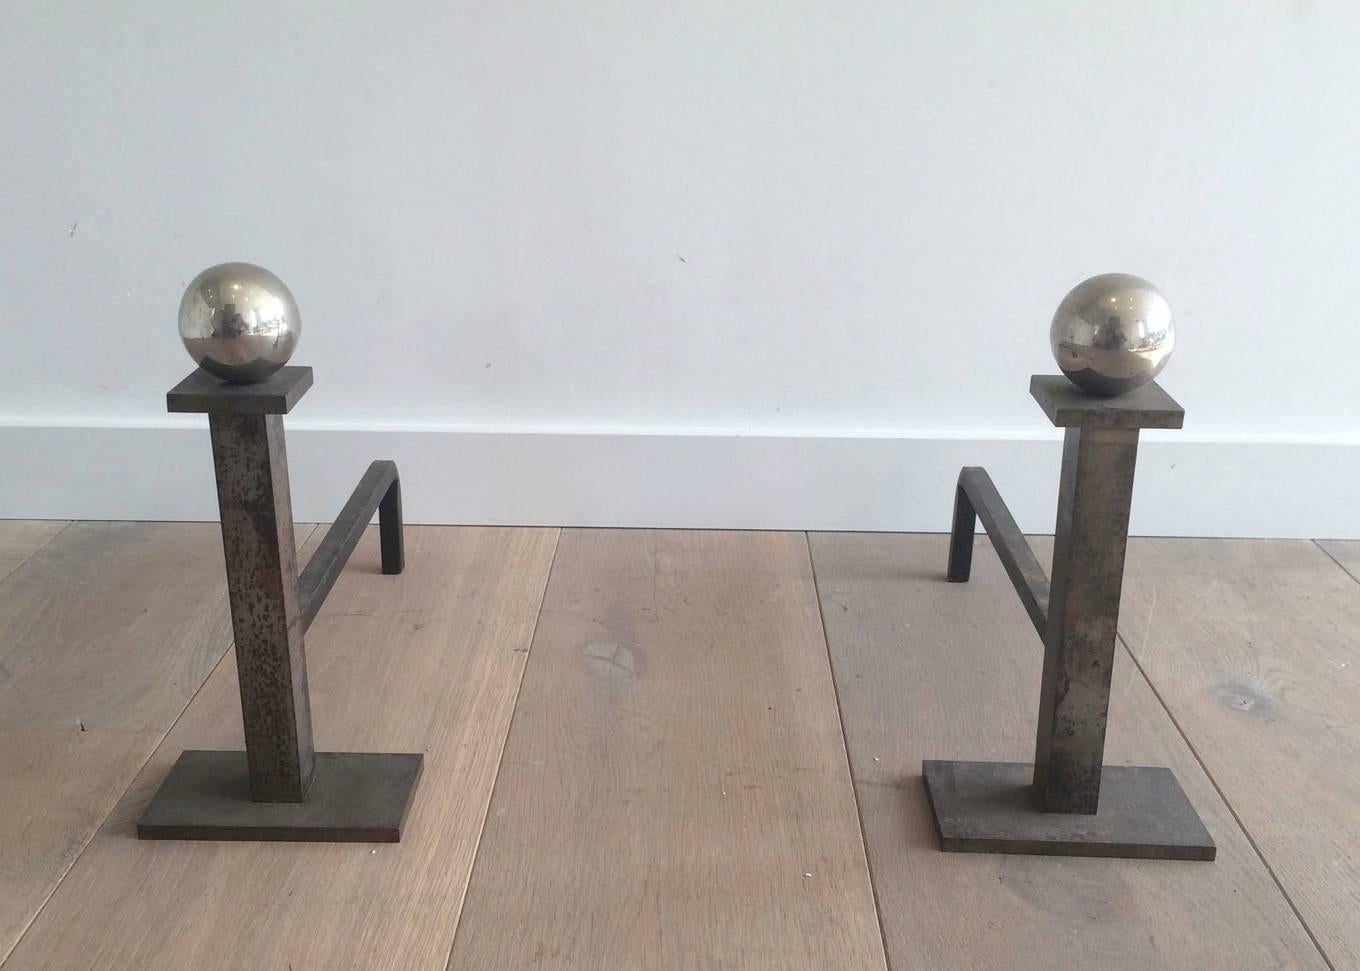 Pair of modernist andirons made of patinated brushed steel square elements with a chrome plated balls.

This item is currently in France, please allow 2 to 4 weeks delivery to New York. Shipping costs from France to our warehouse in New York